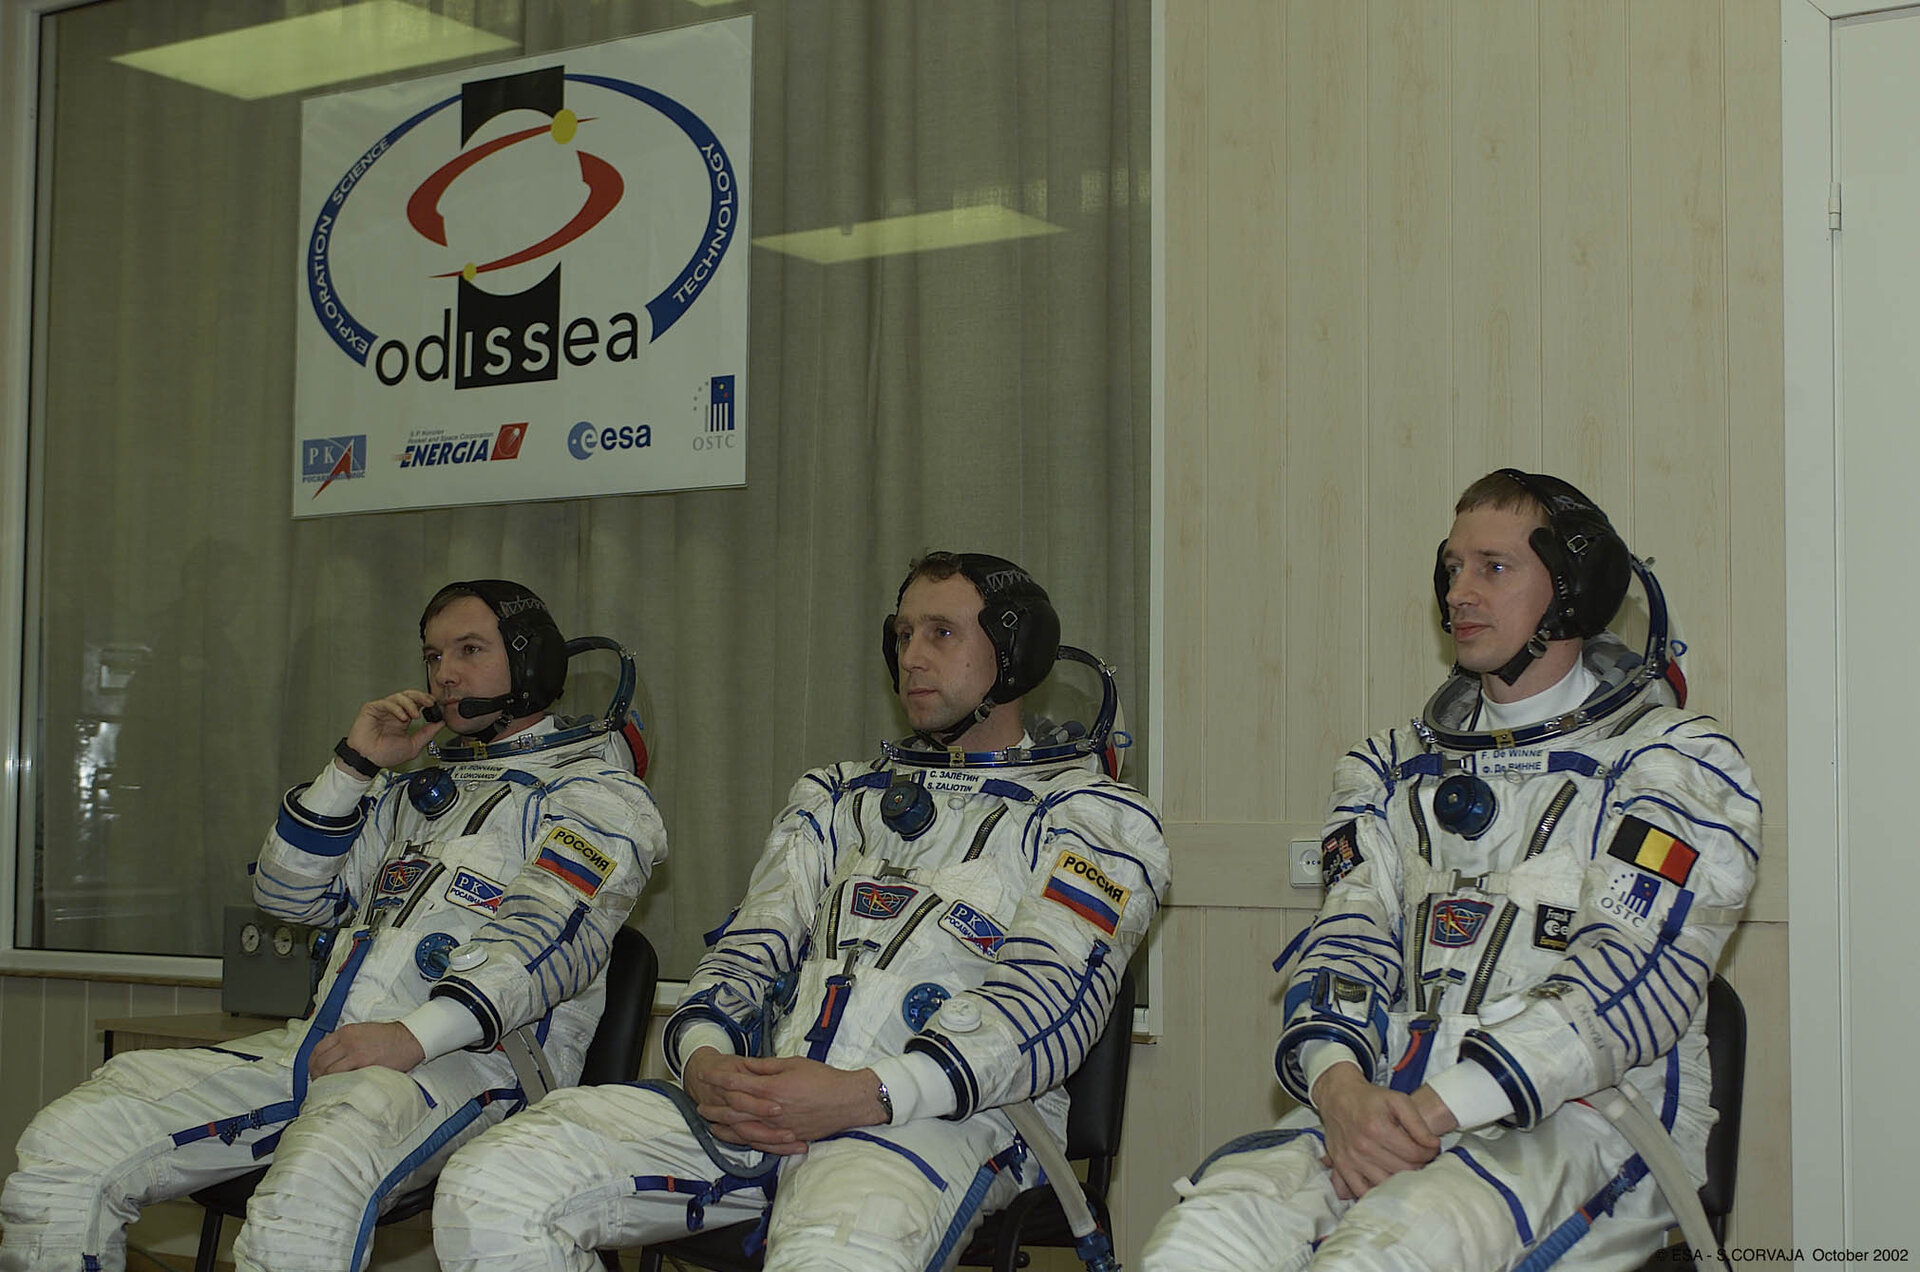 Odissea mission crew wearing their spacesuit before the launch, at Baikonour, 30th October 2002